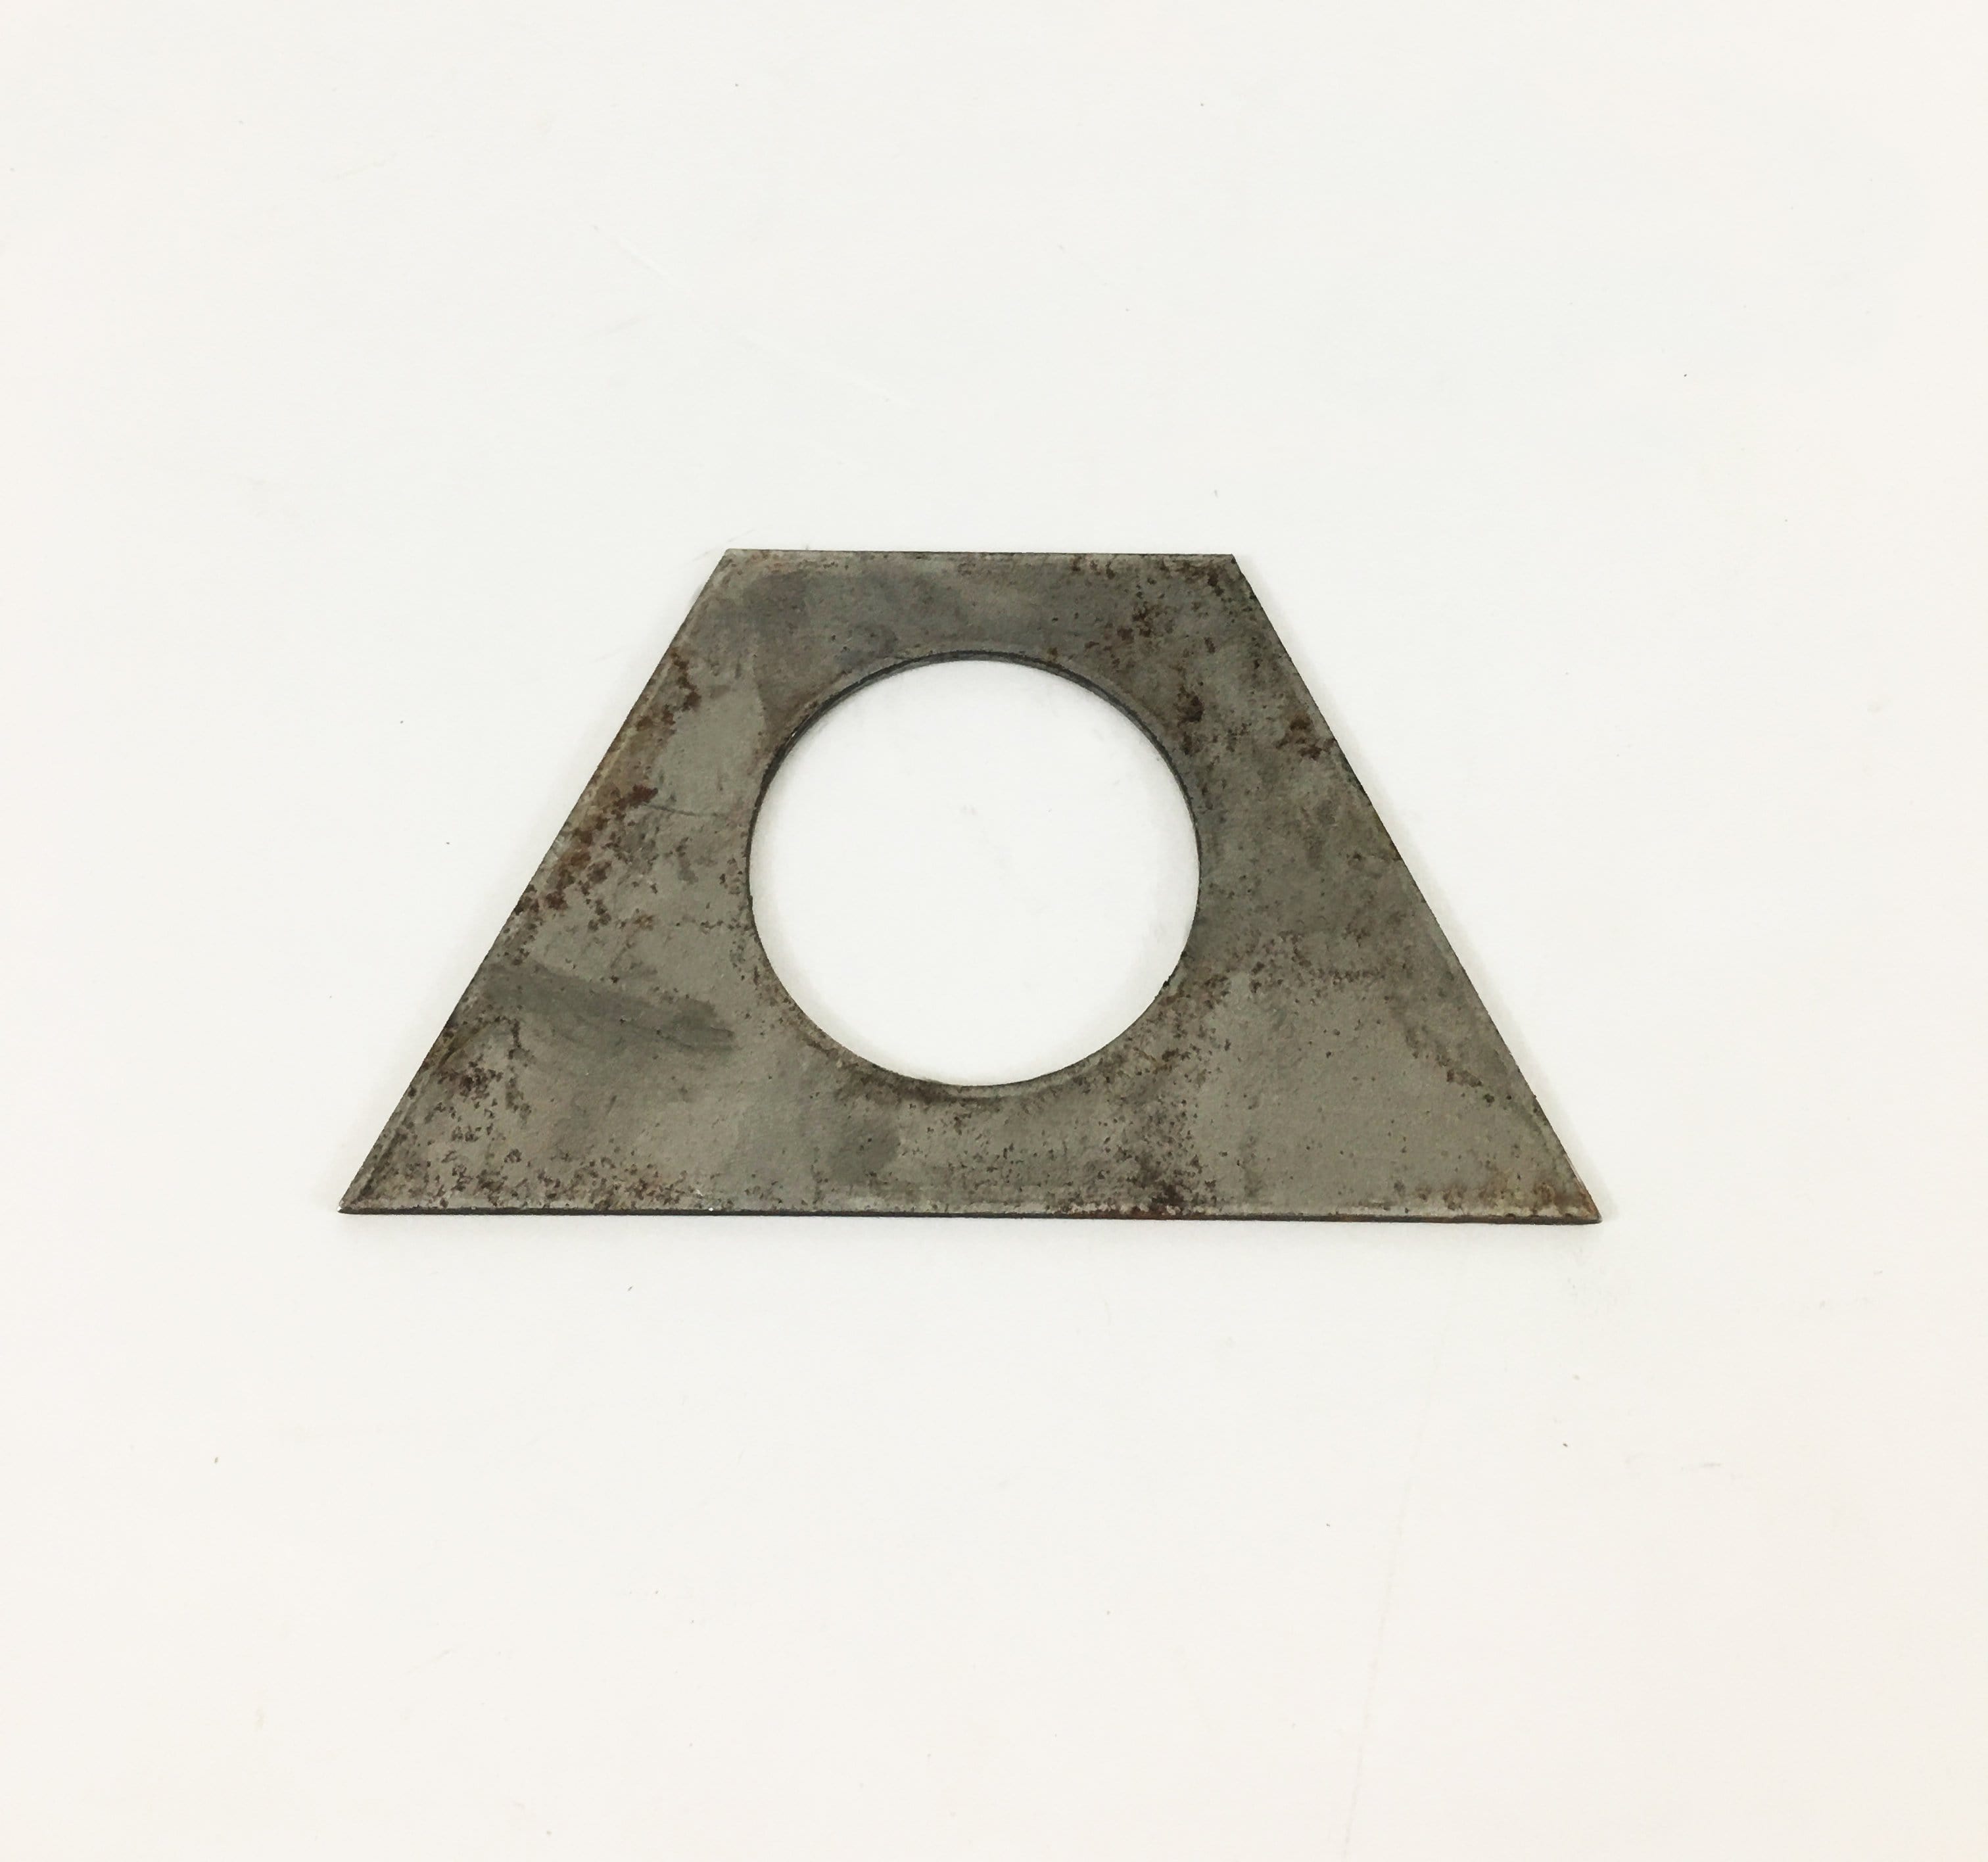 Atwood 83480 Top Support Plate, Only For Use With 83461 or 84140 Couplers